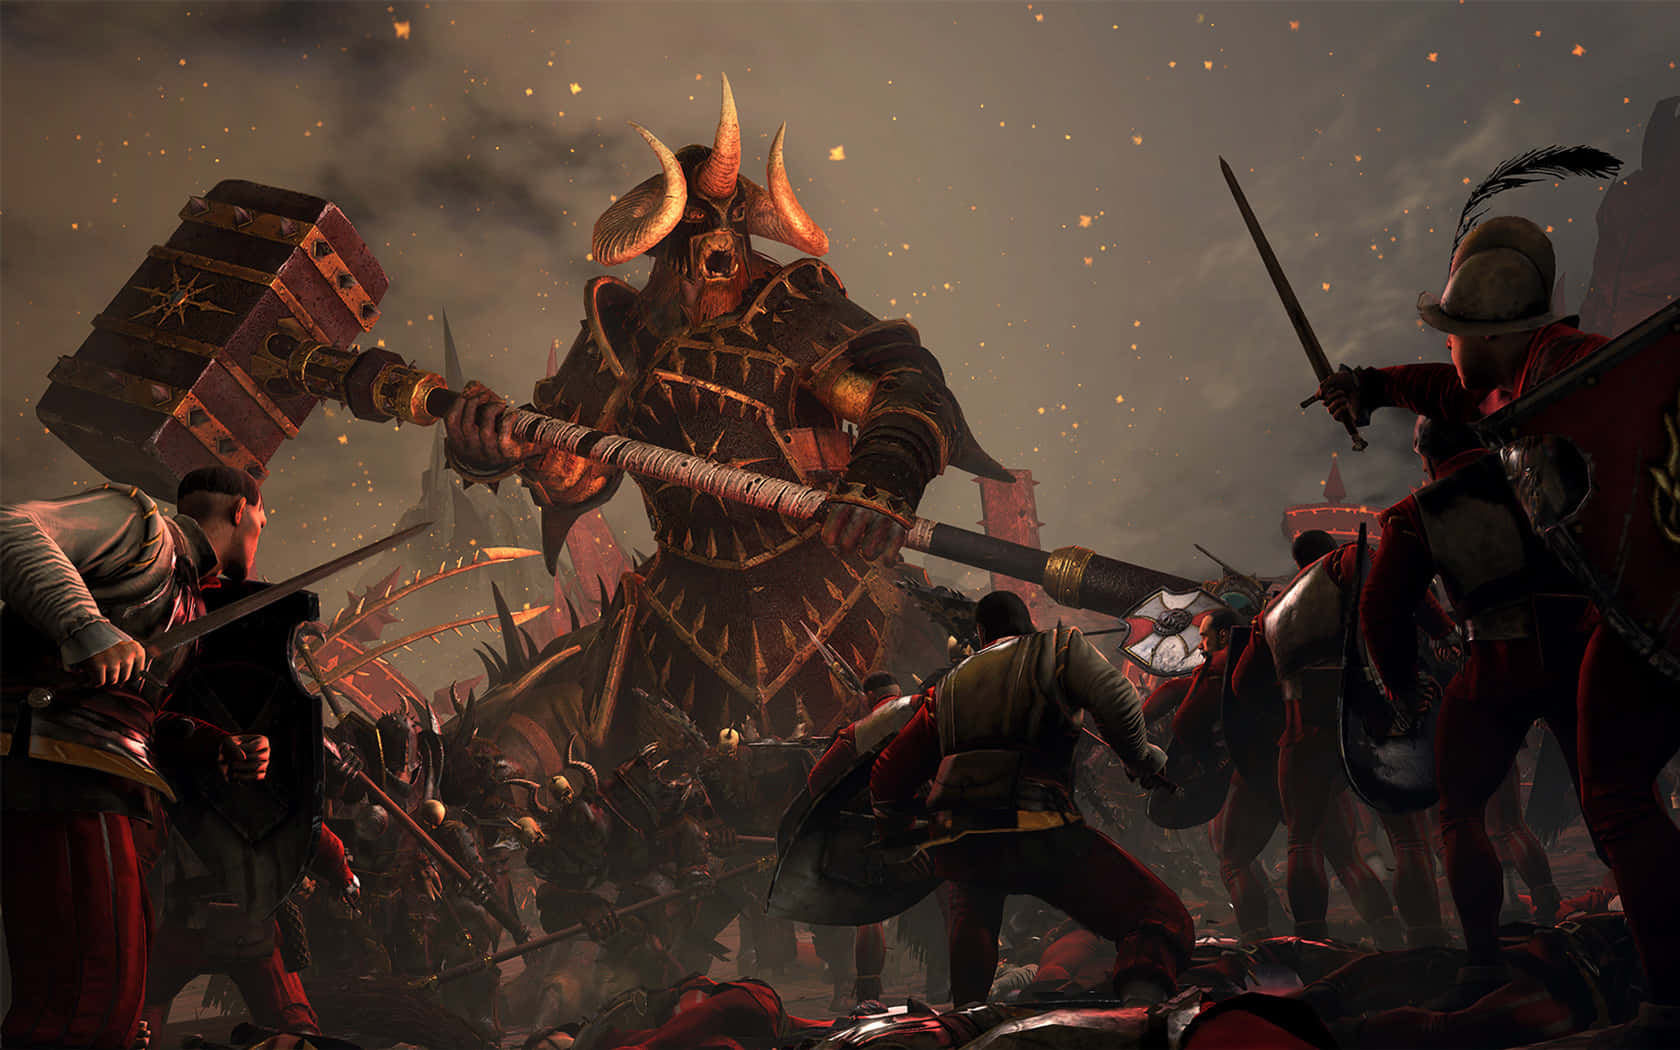 Conquer the lands of Total War with Attila the Hun.